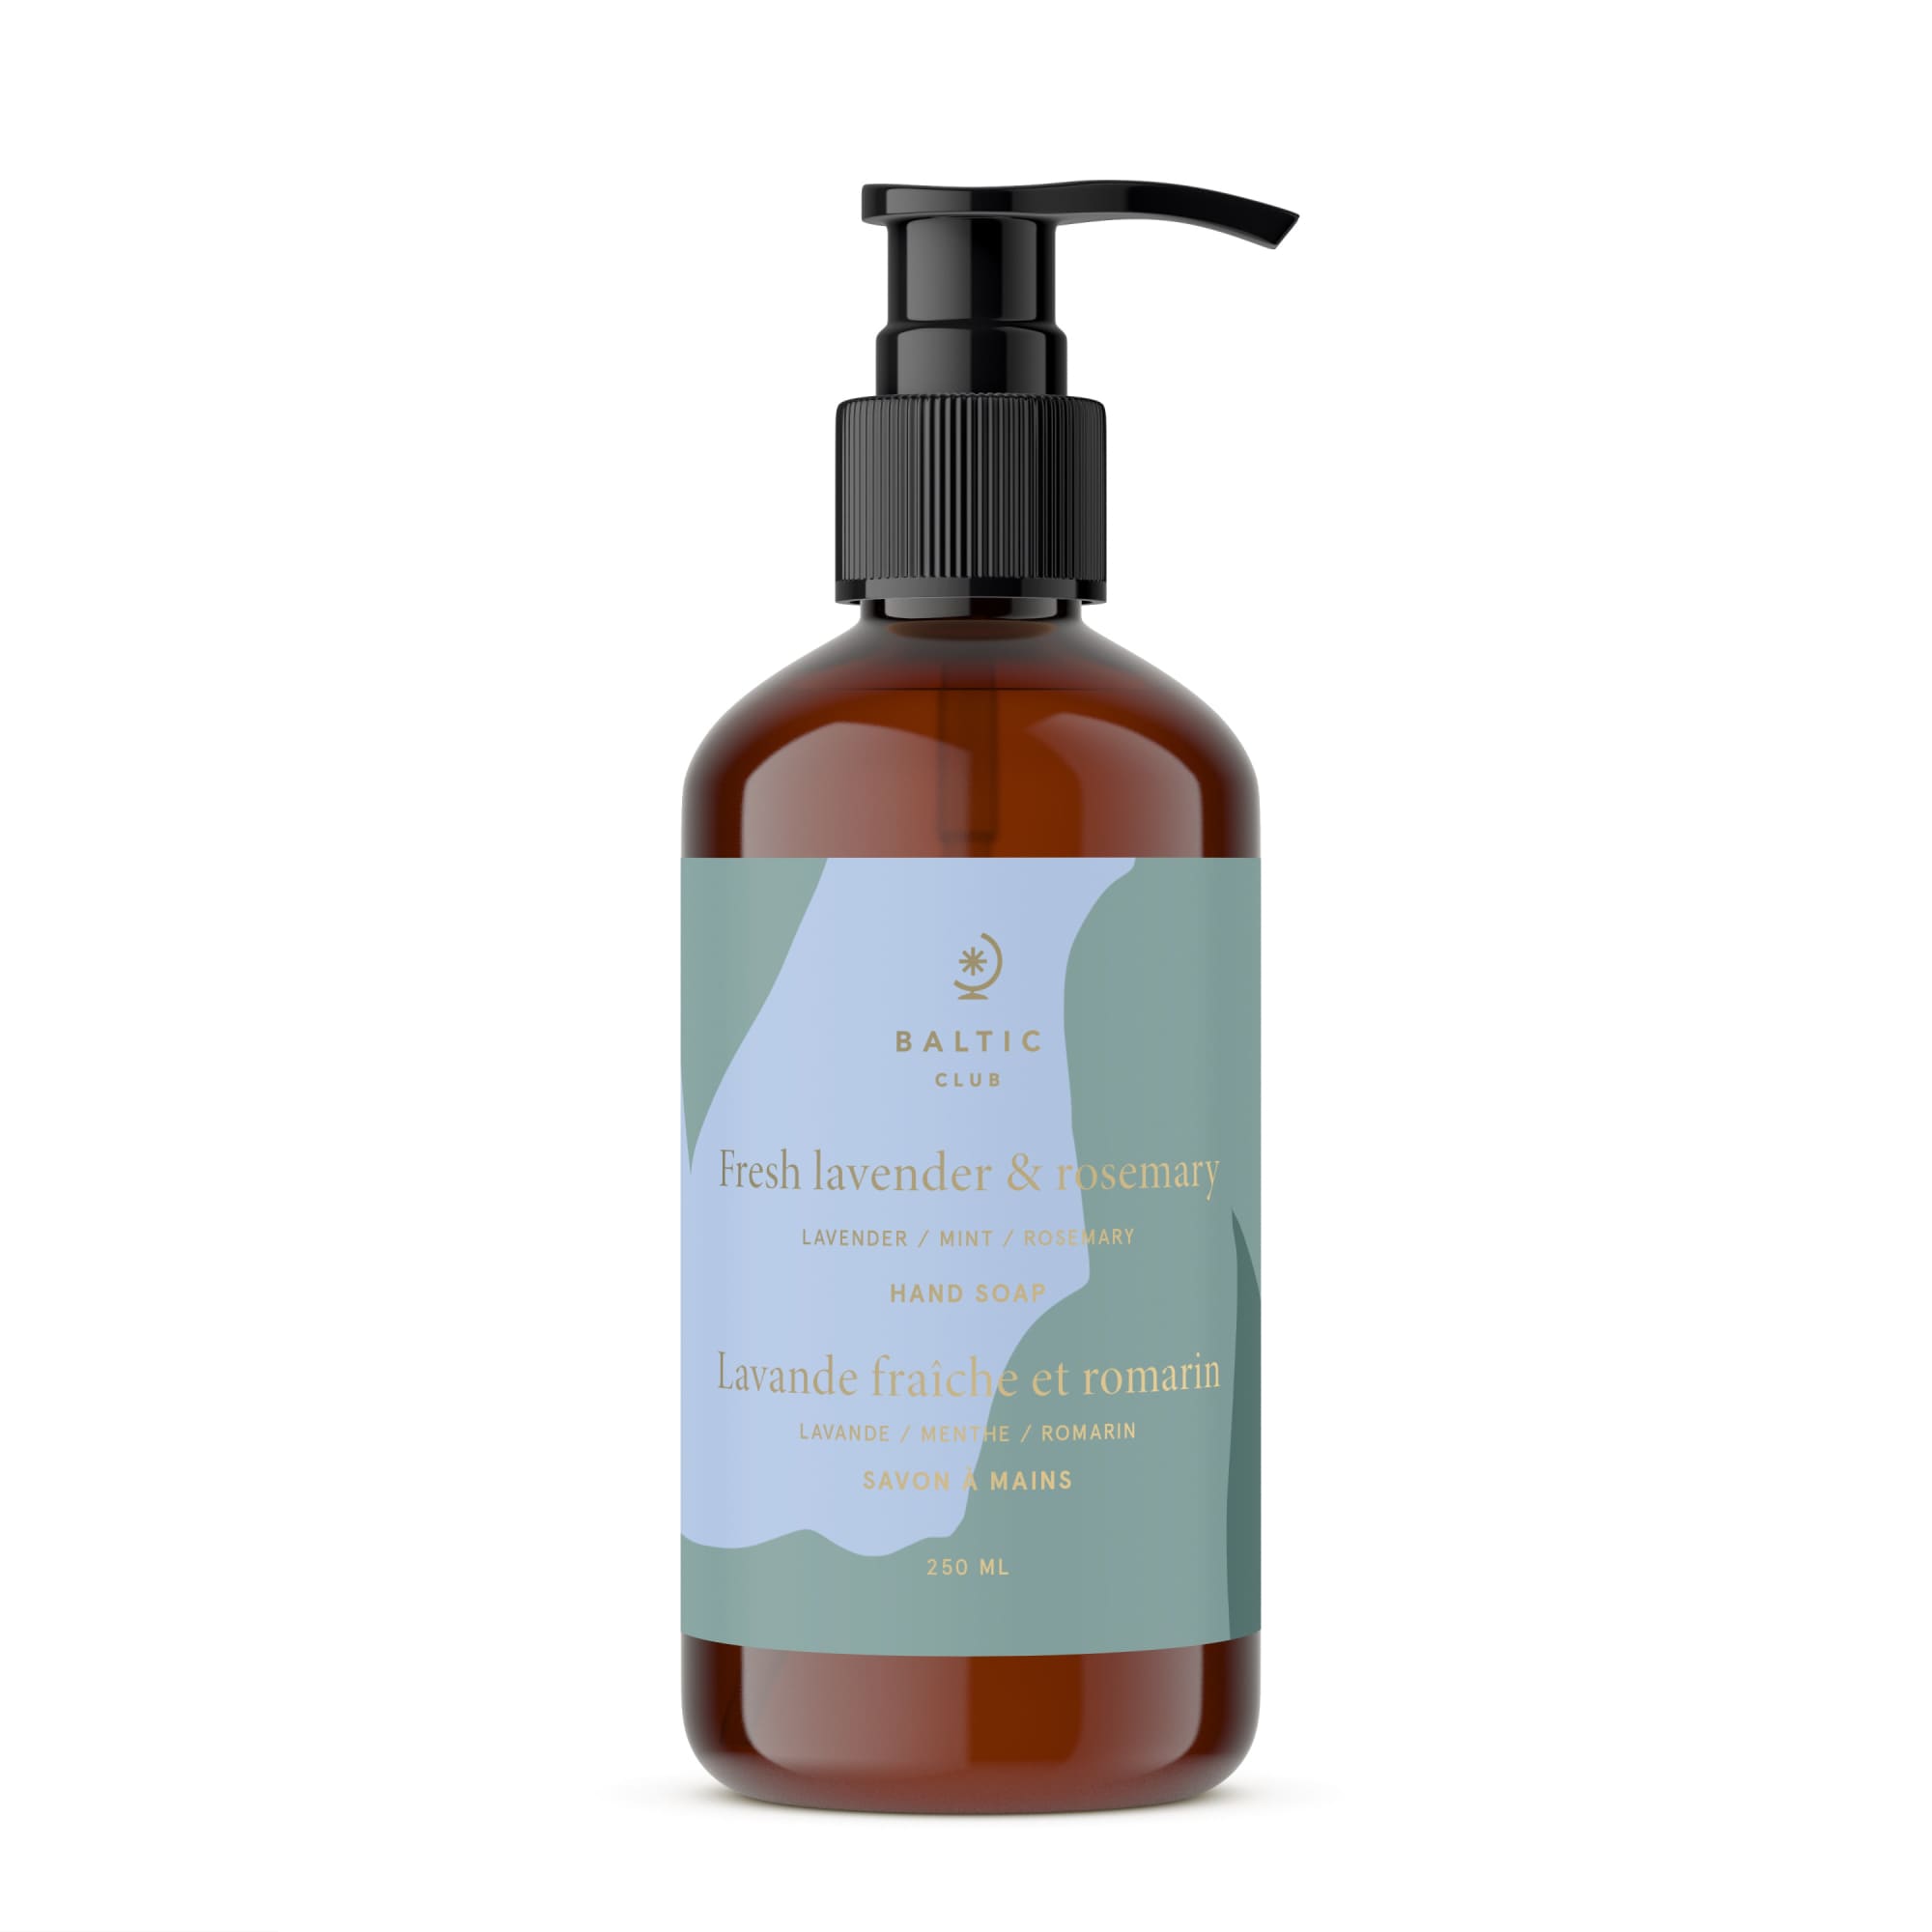 Lavender and Rosemary liquid hand soap bottle